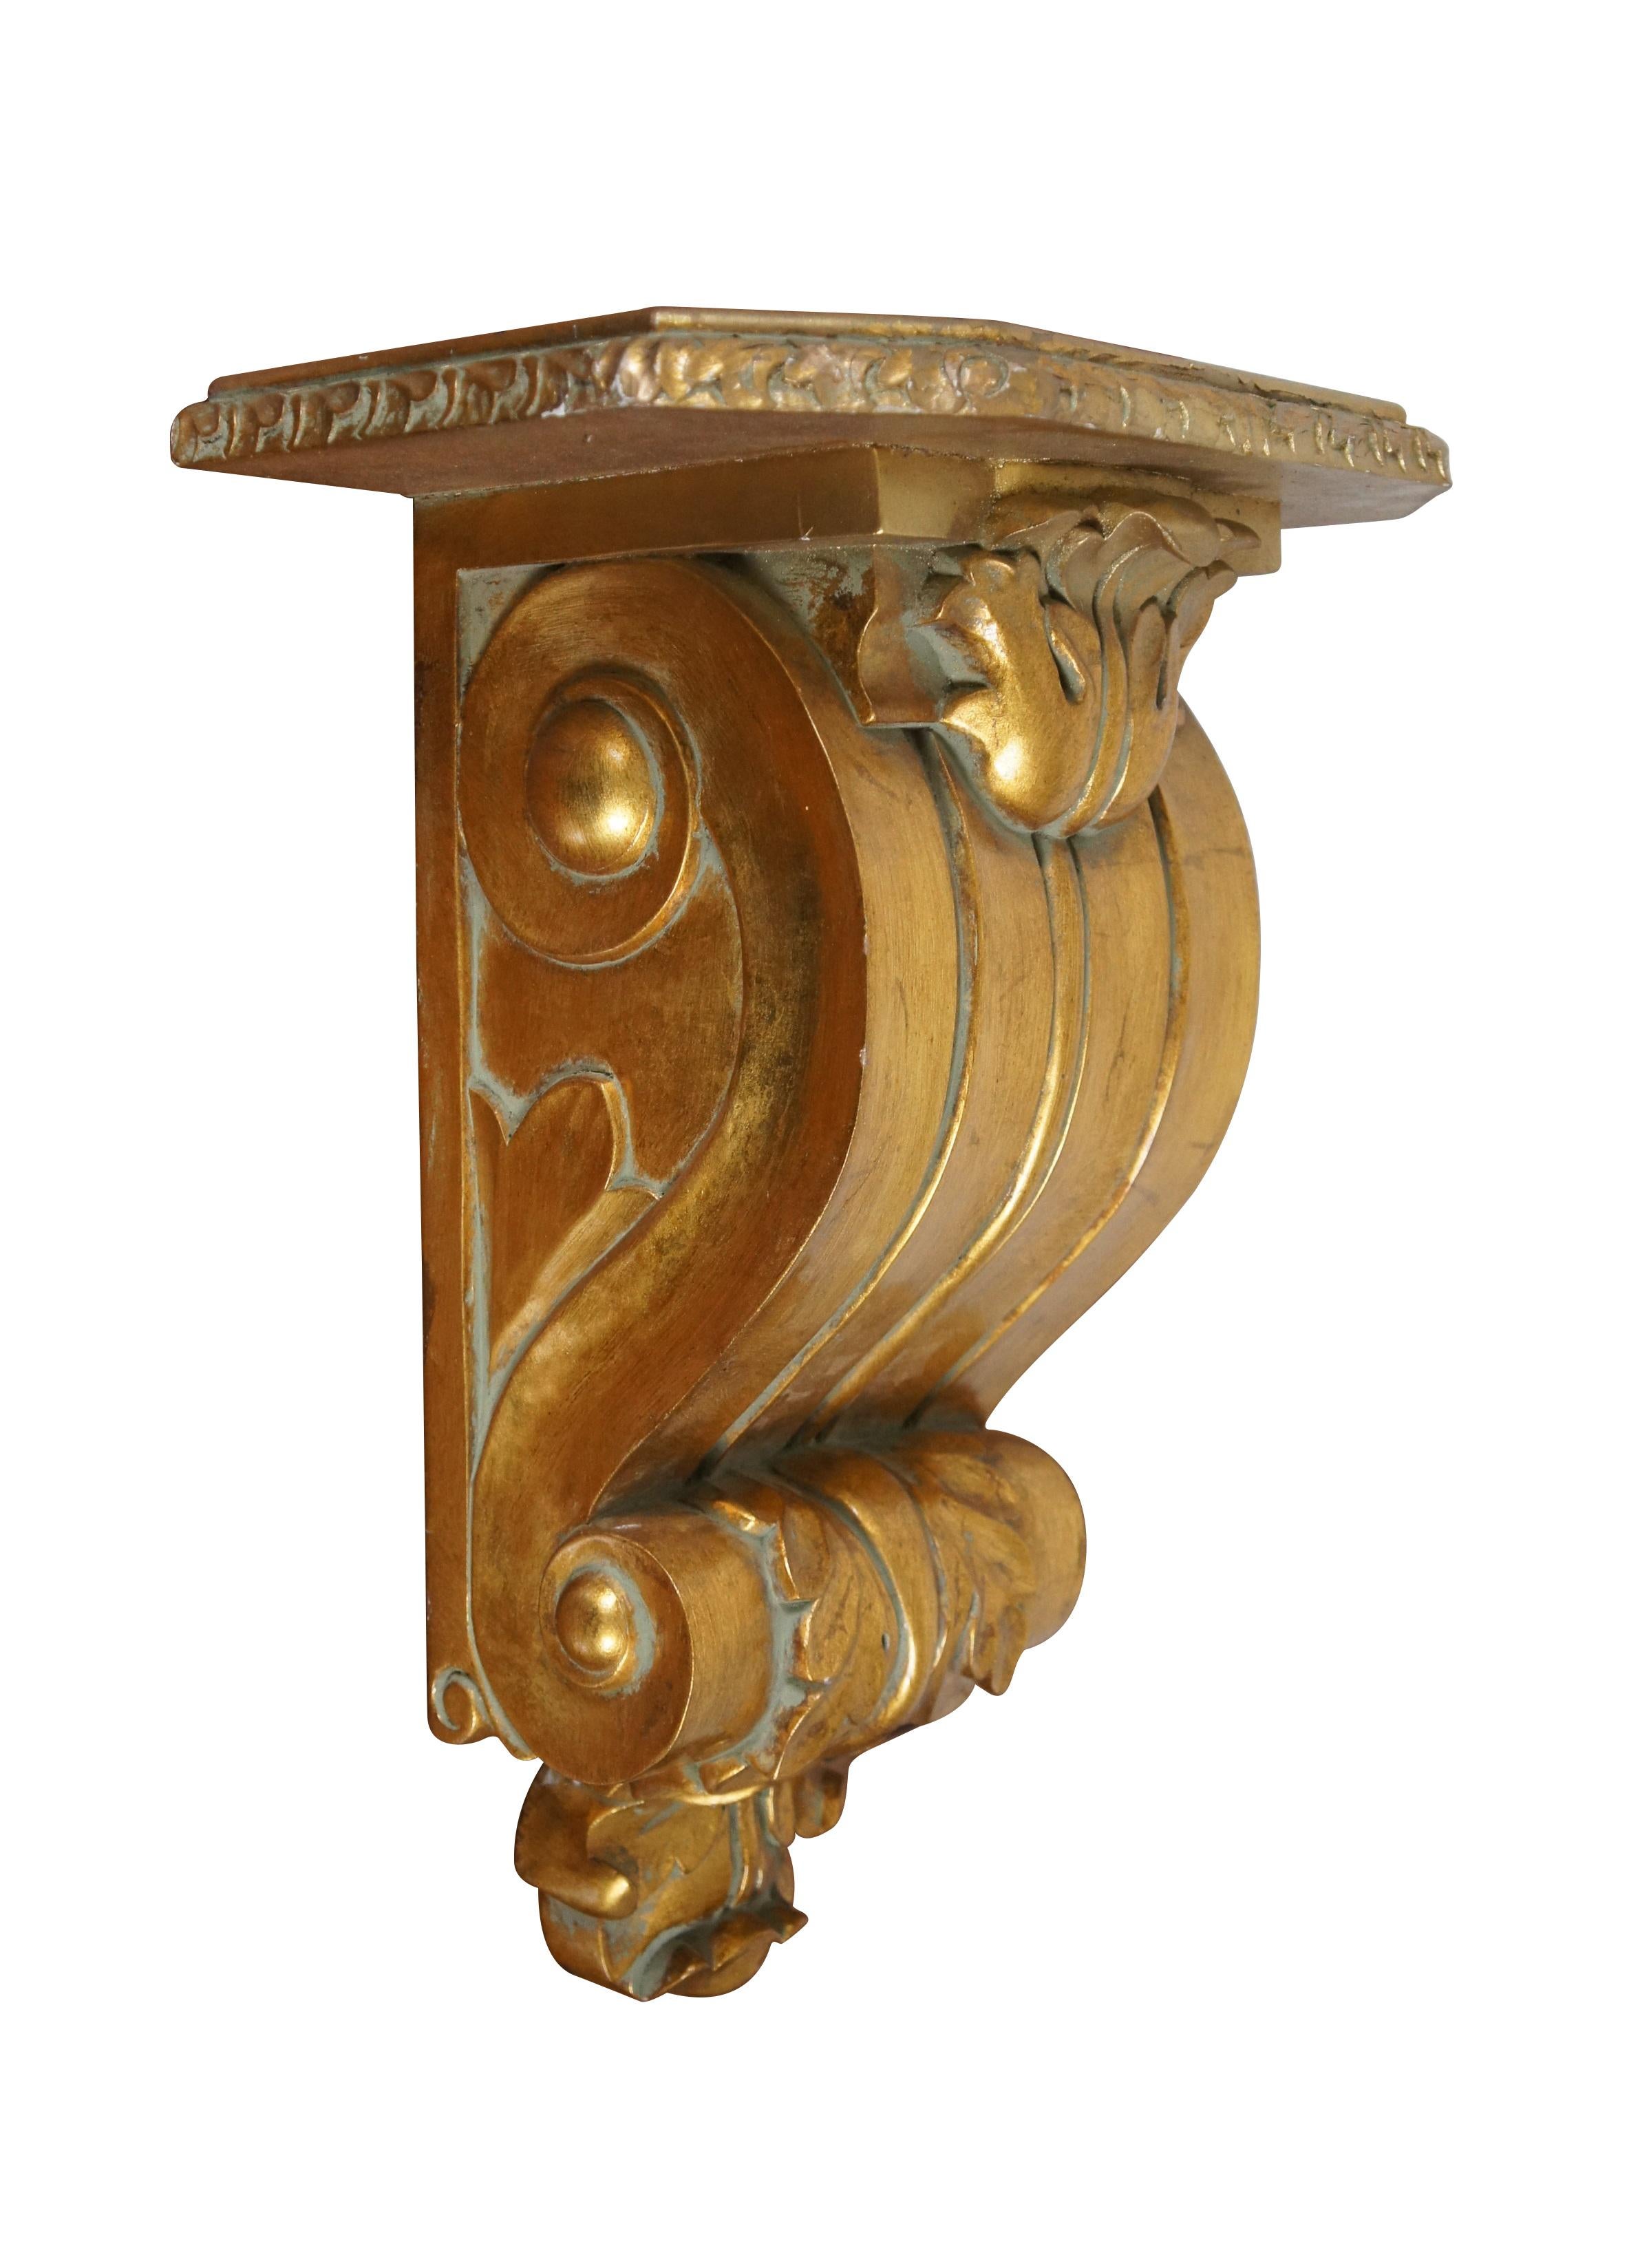 Neoclassical Revival 2 Large Scrolled Acanthus Gold Gilt Wood Corbel Wall Bracket Sconce Shelves 20